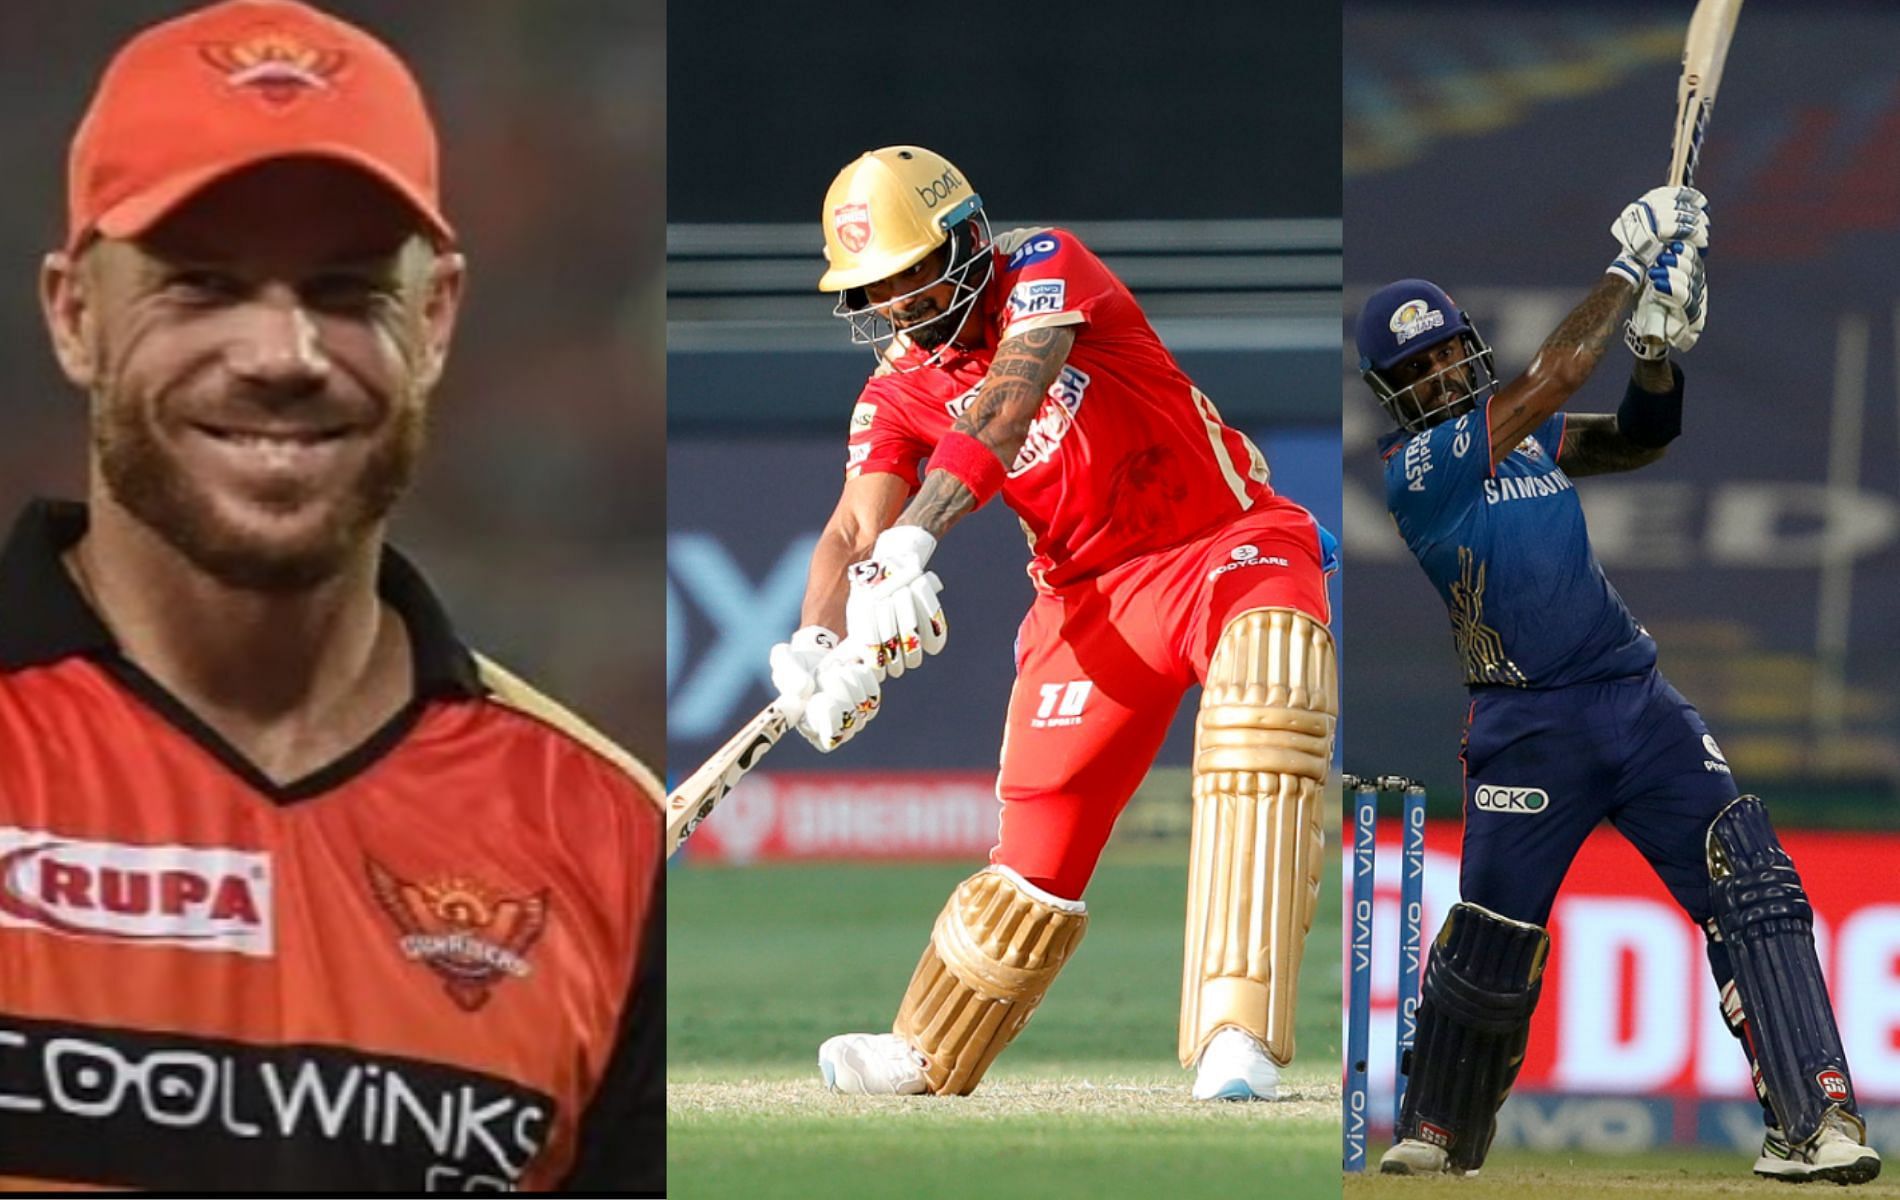 IPL 2022: We look at batters who the two new franchises may target.